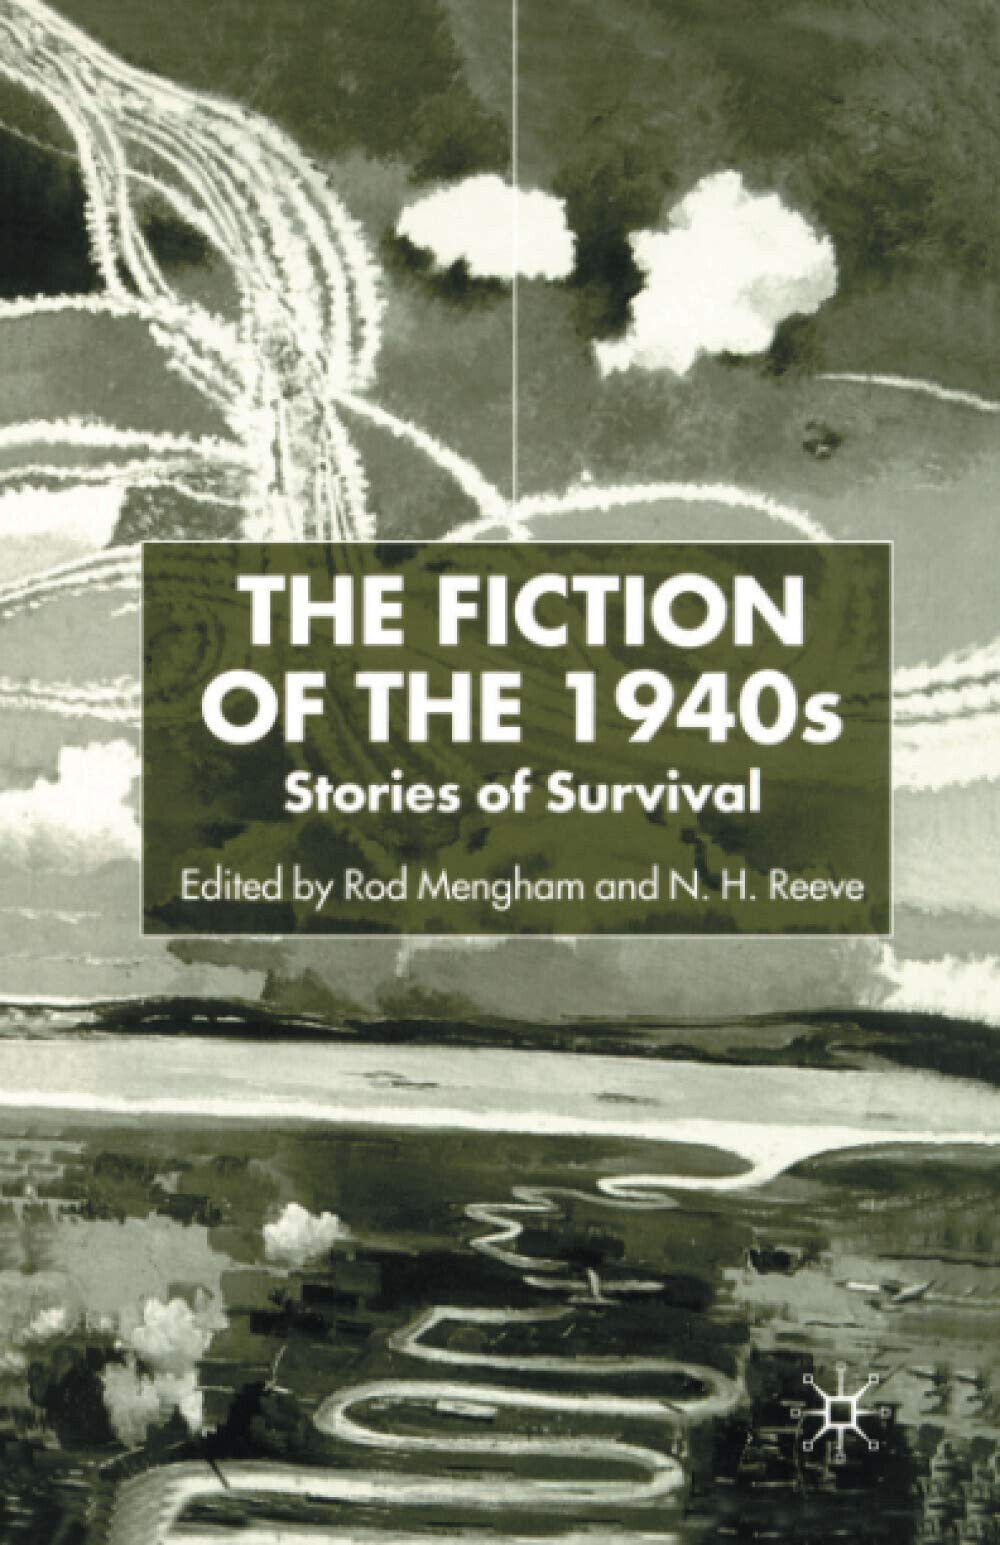 The Fiction of the 1940s: Stories of Survival - N. Reeve - palgrave, 2001